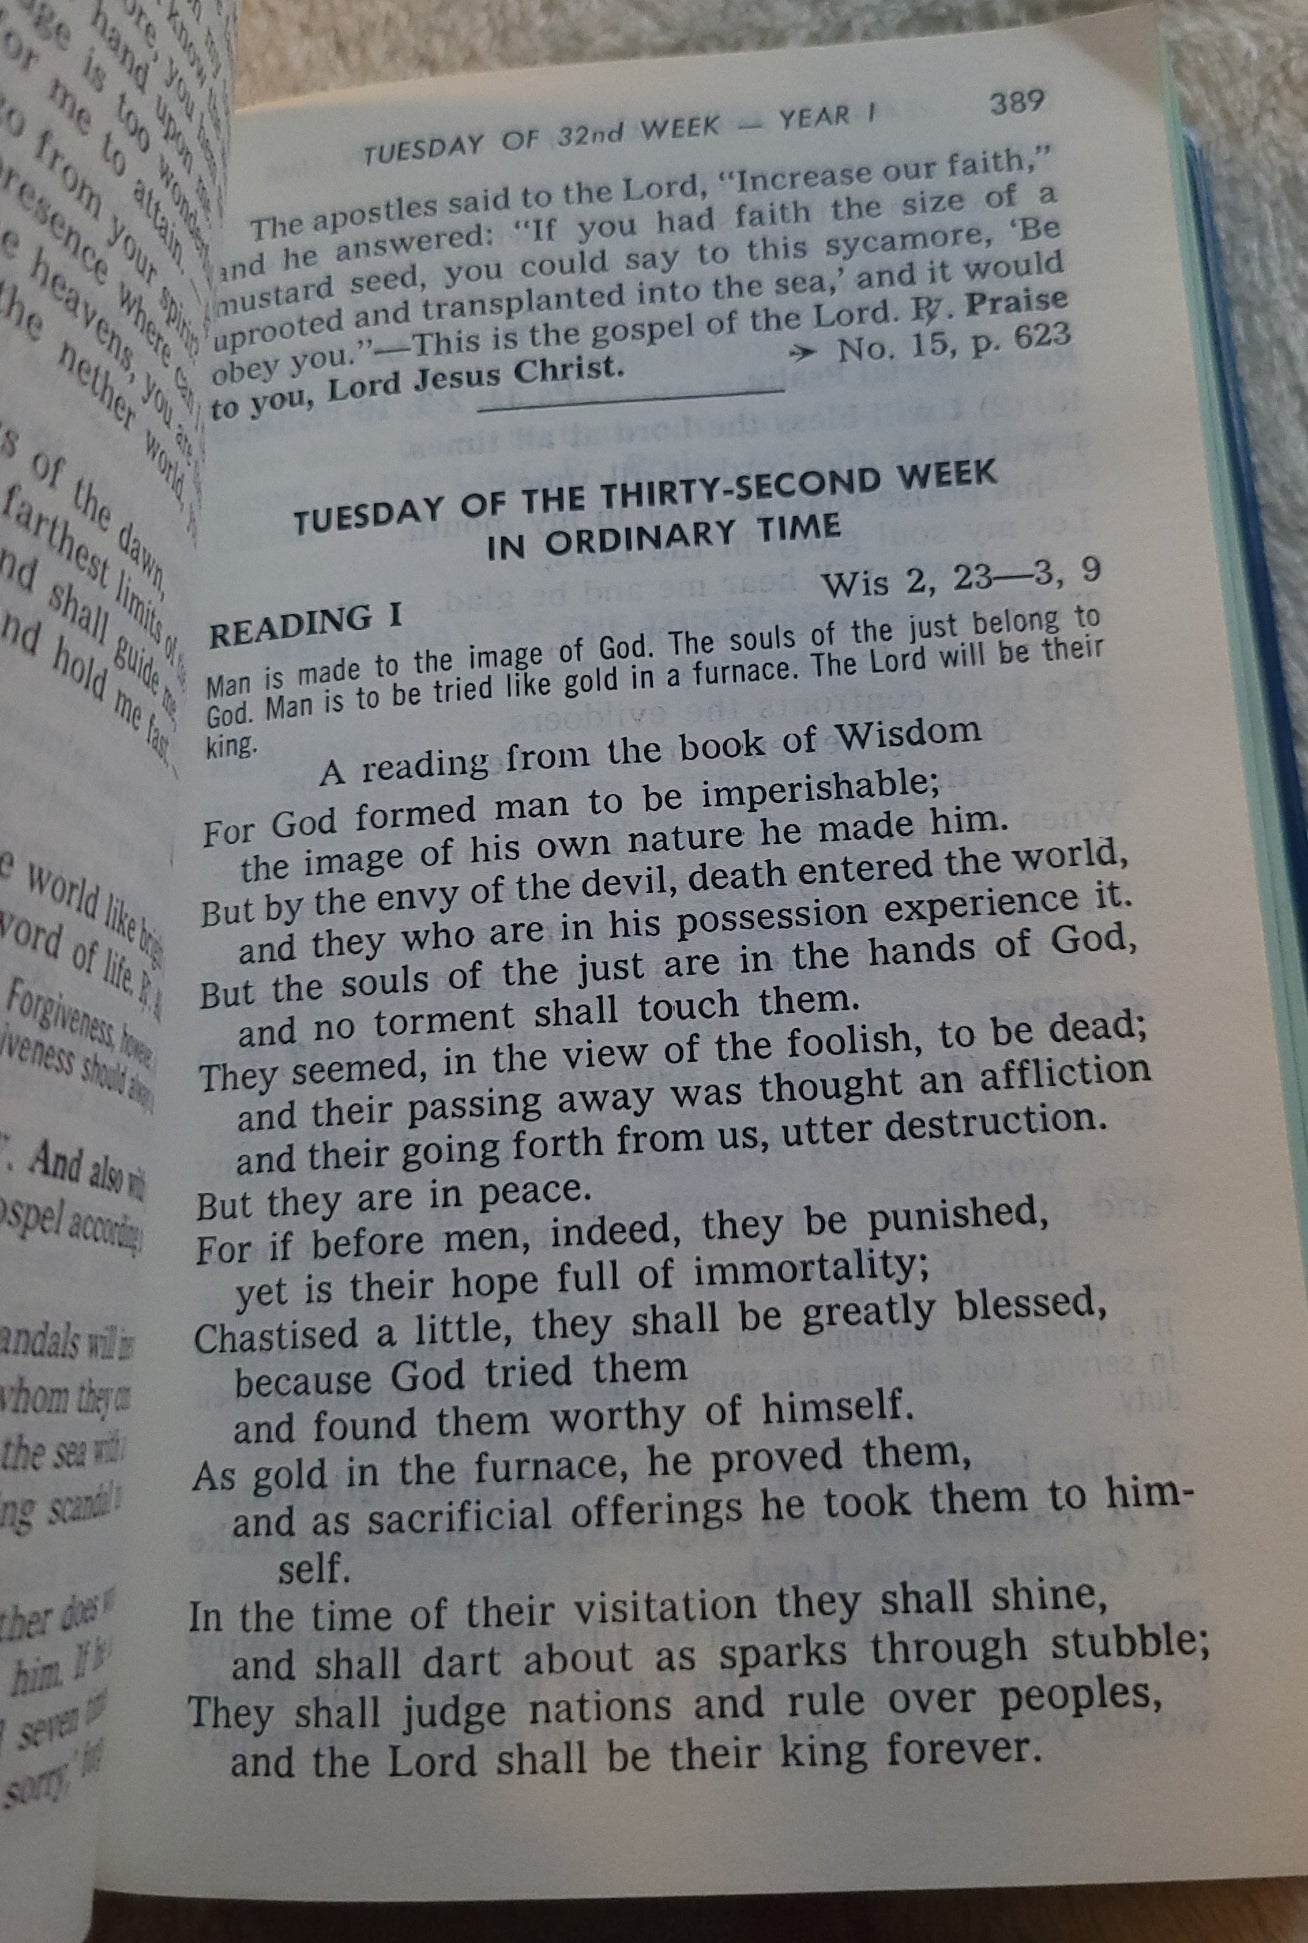 Vintage book for sale, "New....St. Joseph Weekday Missal Vol 2: Advent to Pentecost" Complete Edition, by the Catholic Book Publishing Company, "In accordance with Vatican II". View of page 389